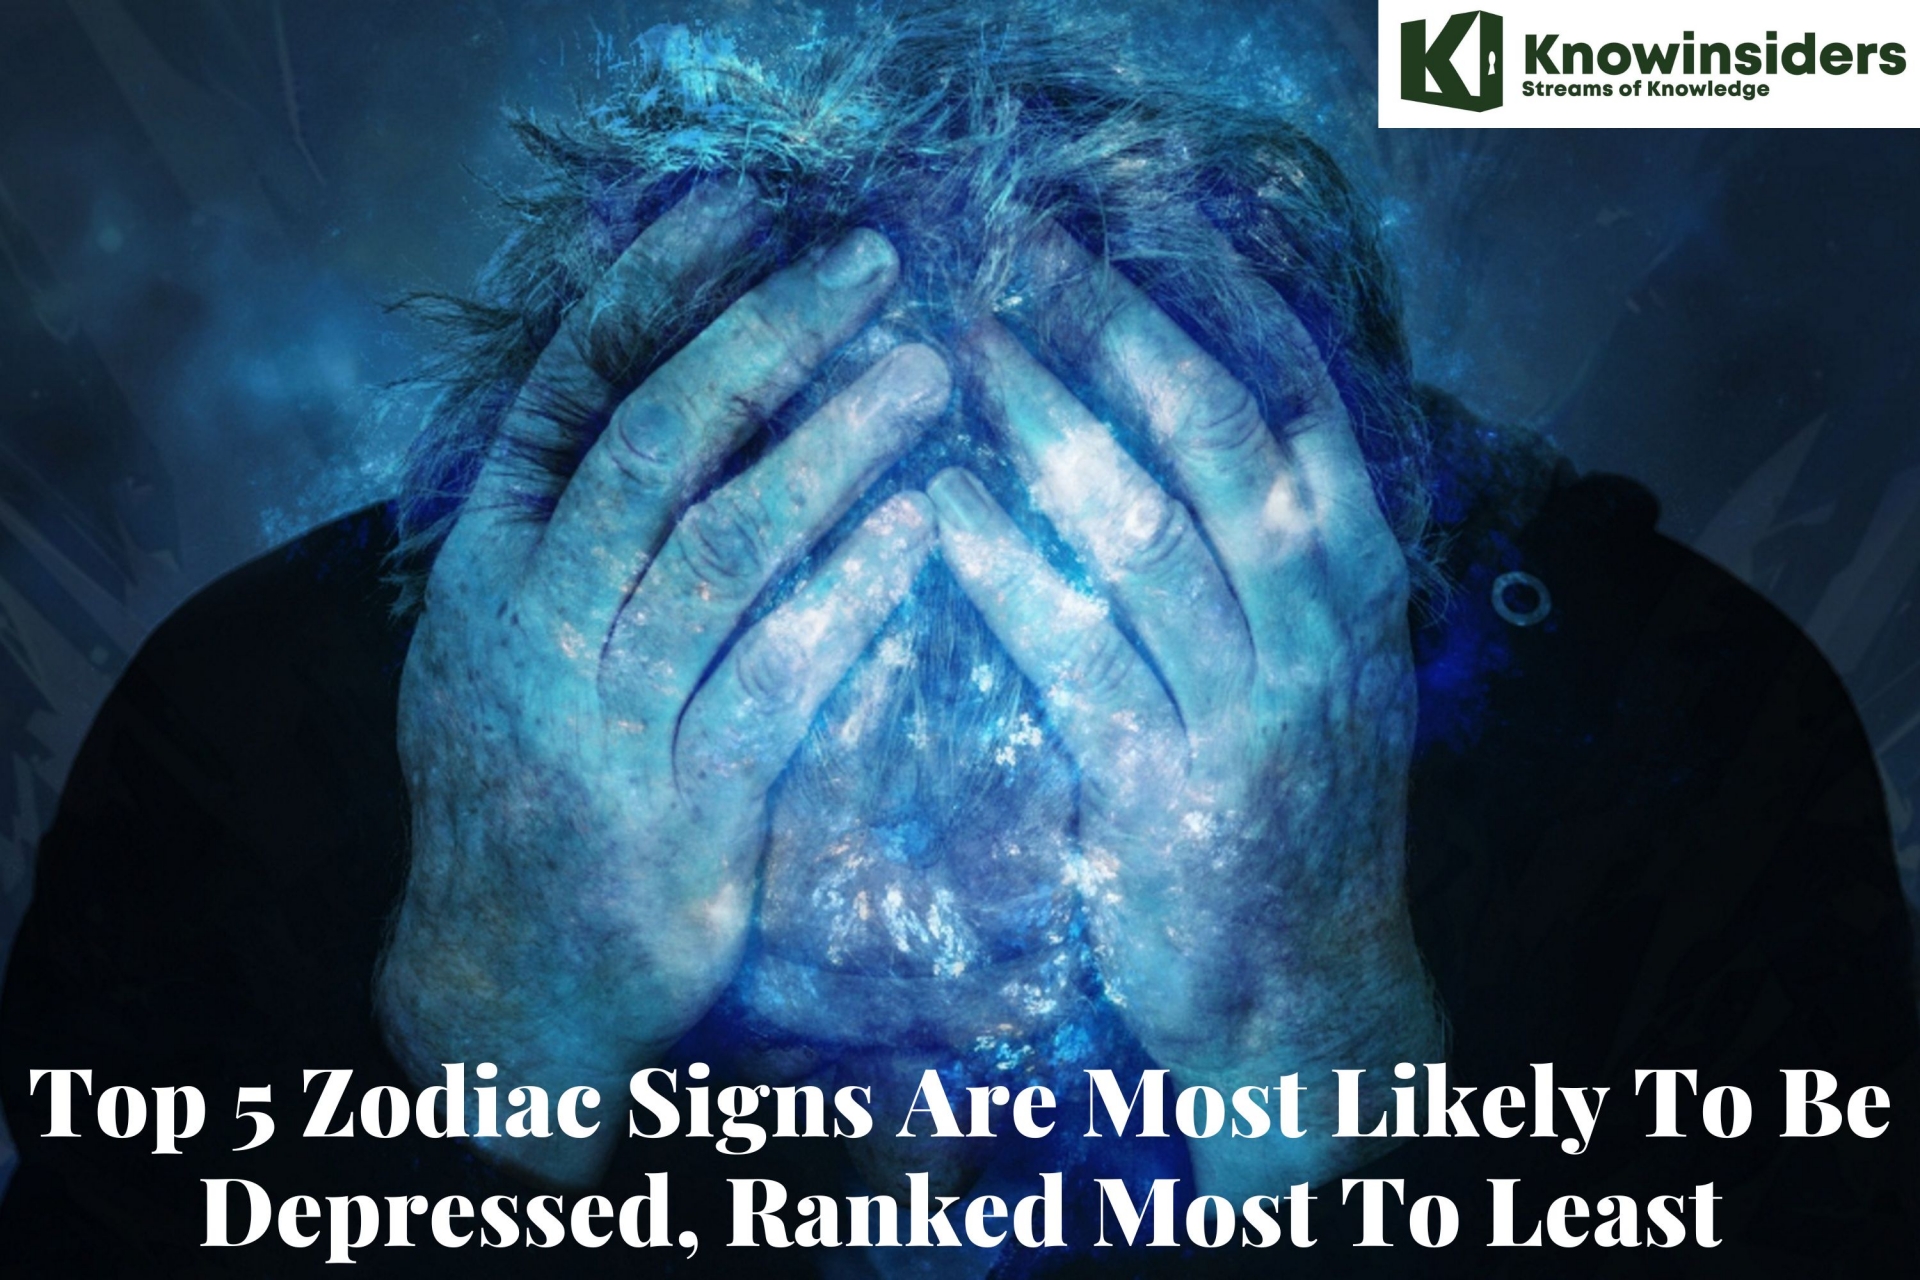 Top 5 Zodiac Signs Are Most Likely To Be Depressed, Ranked Most To Least